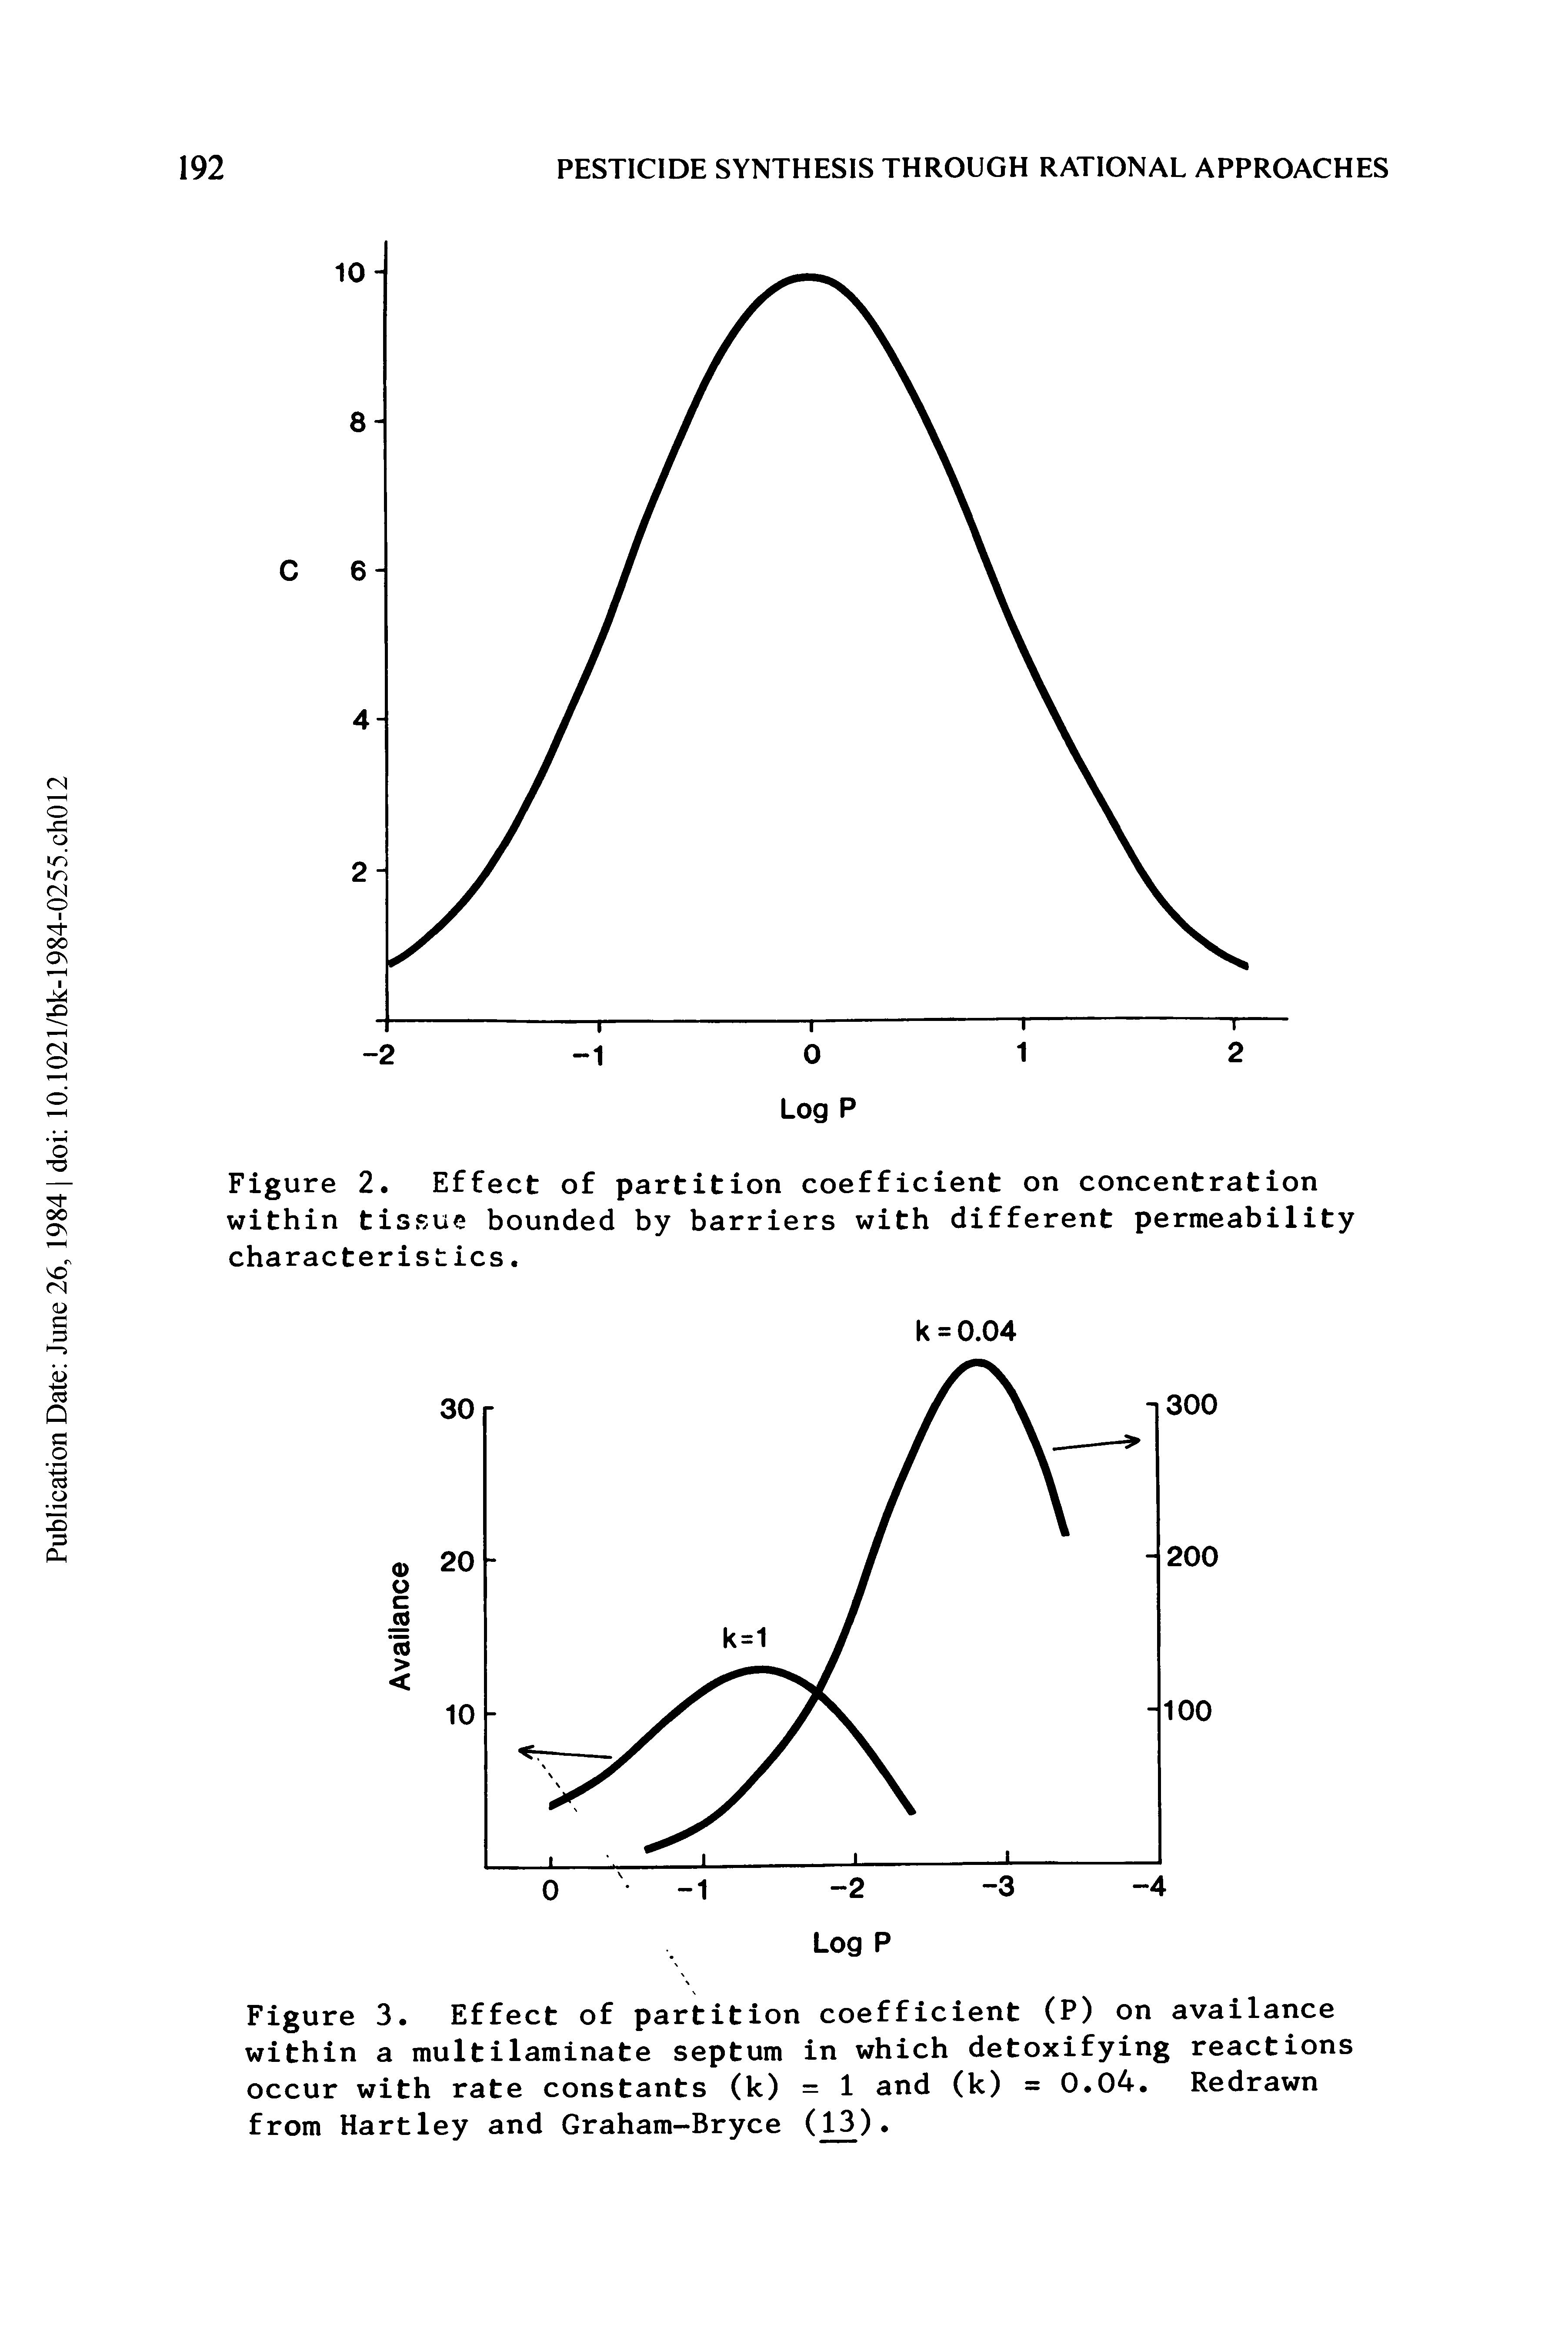 Figure 3. Effect of partition coefficient (P) on availance within a multilaminate septum in which detoxifying reactions occur with rate constants (k) = 1 and (k) = 0.04. Redrawn from Hartley and Graham-Bryce (13).